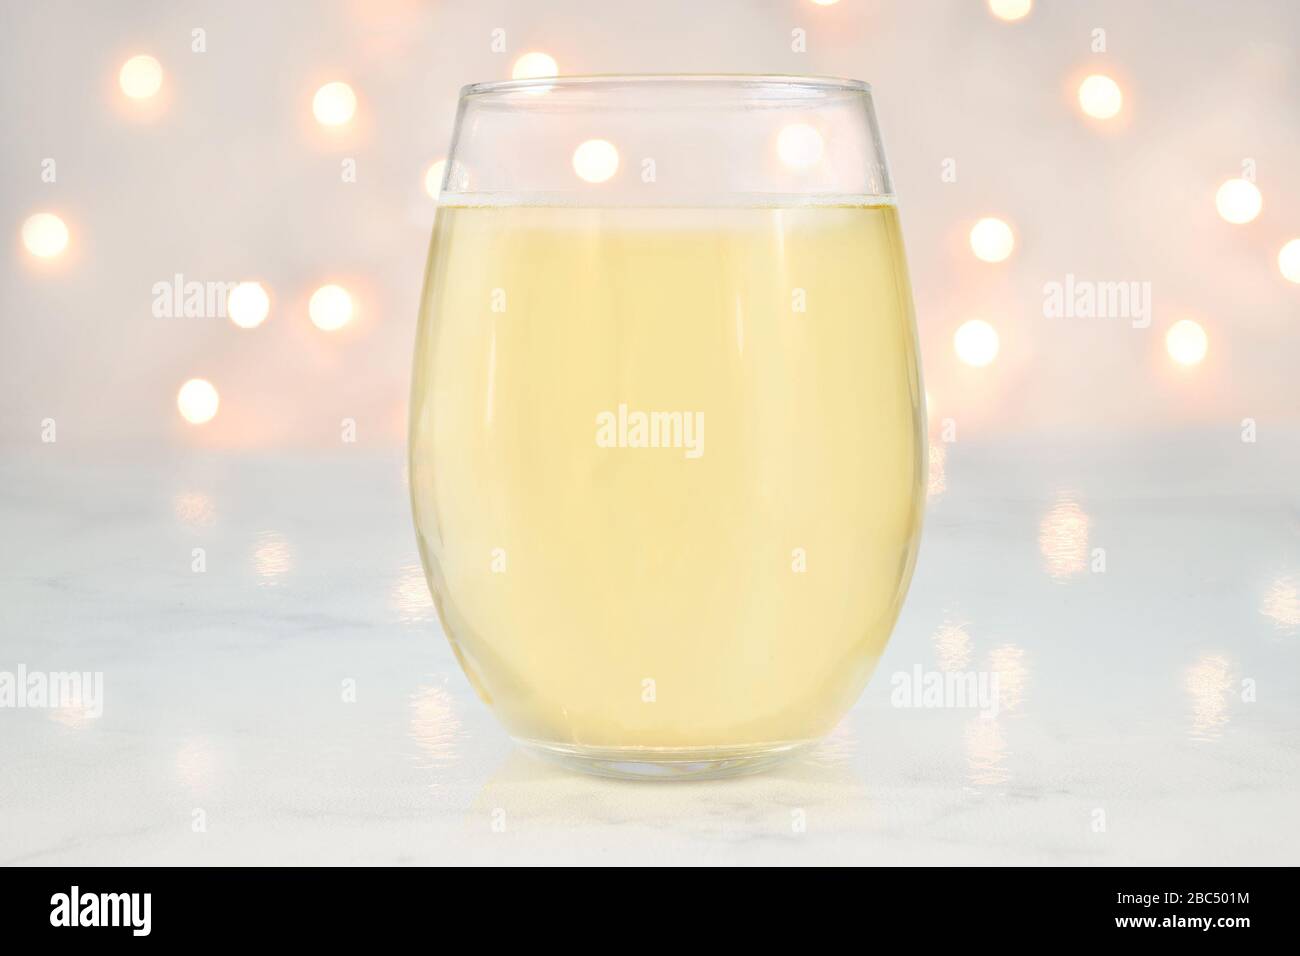 Download No Stem Wineglass Mockup Featuring A Stemless Wine Glass Filled With White Wine White Lights Glow Romantically In The Background Stock Photo Alamy